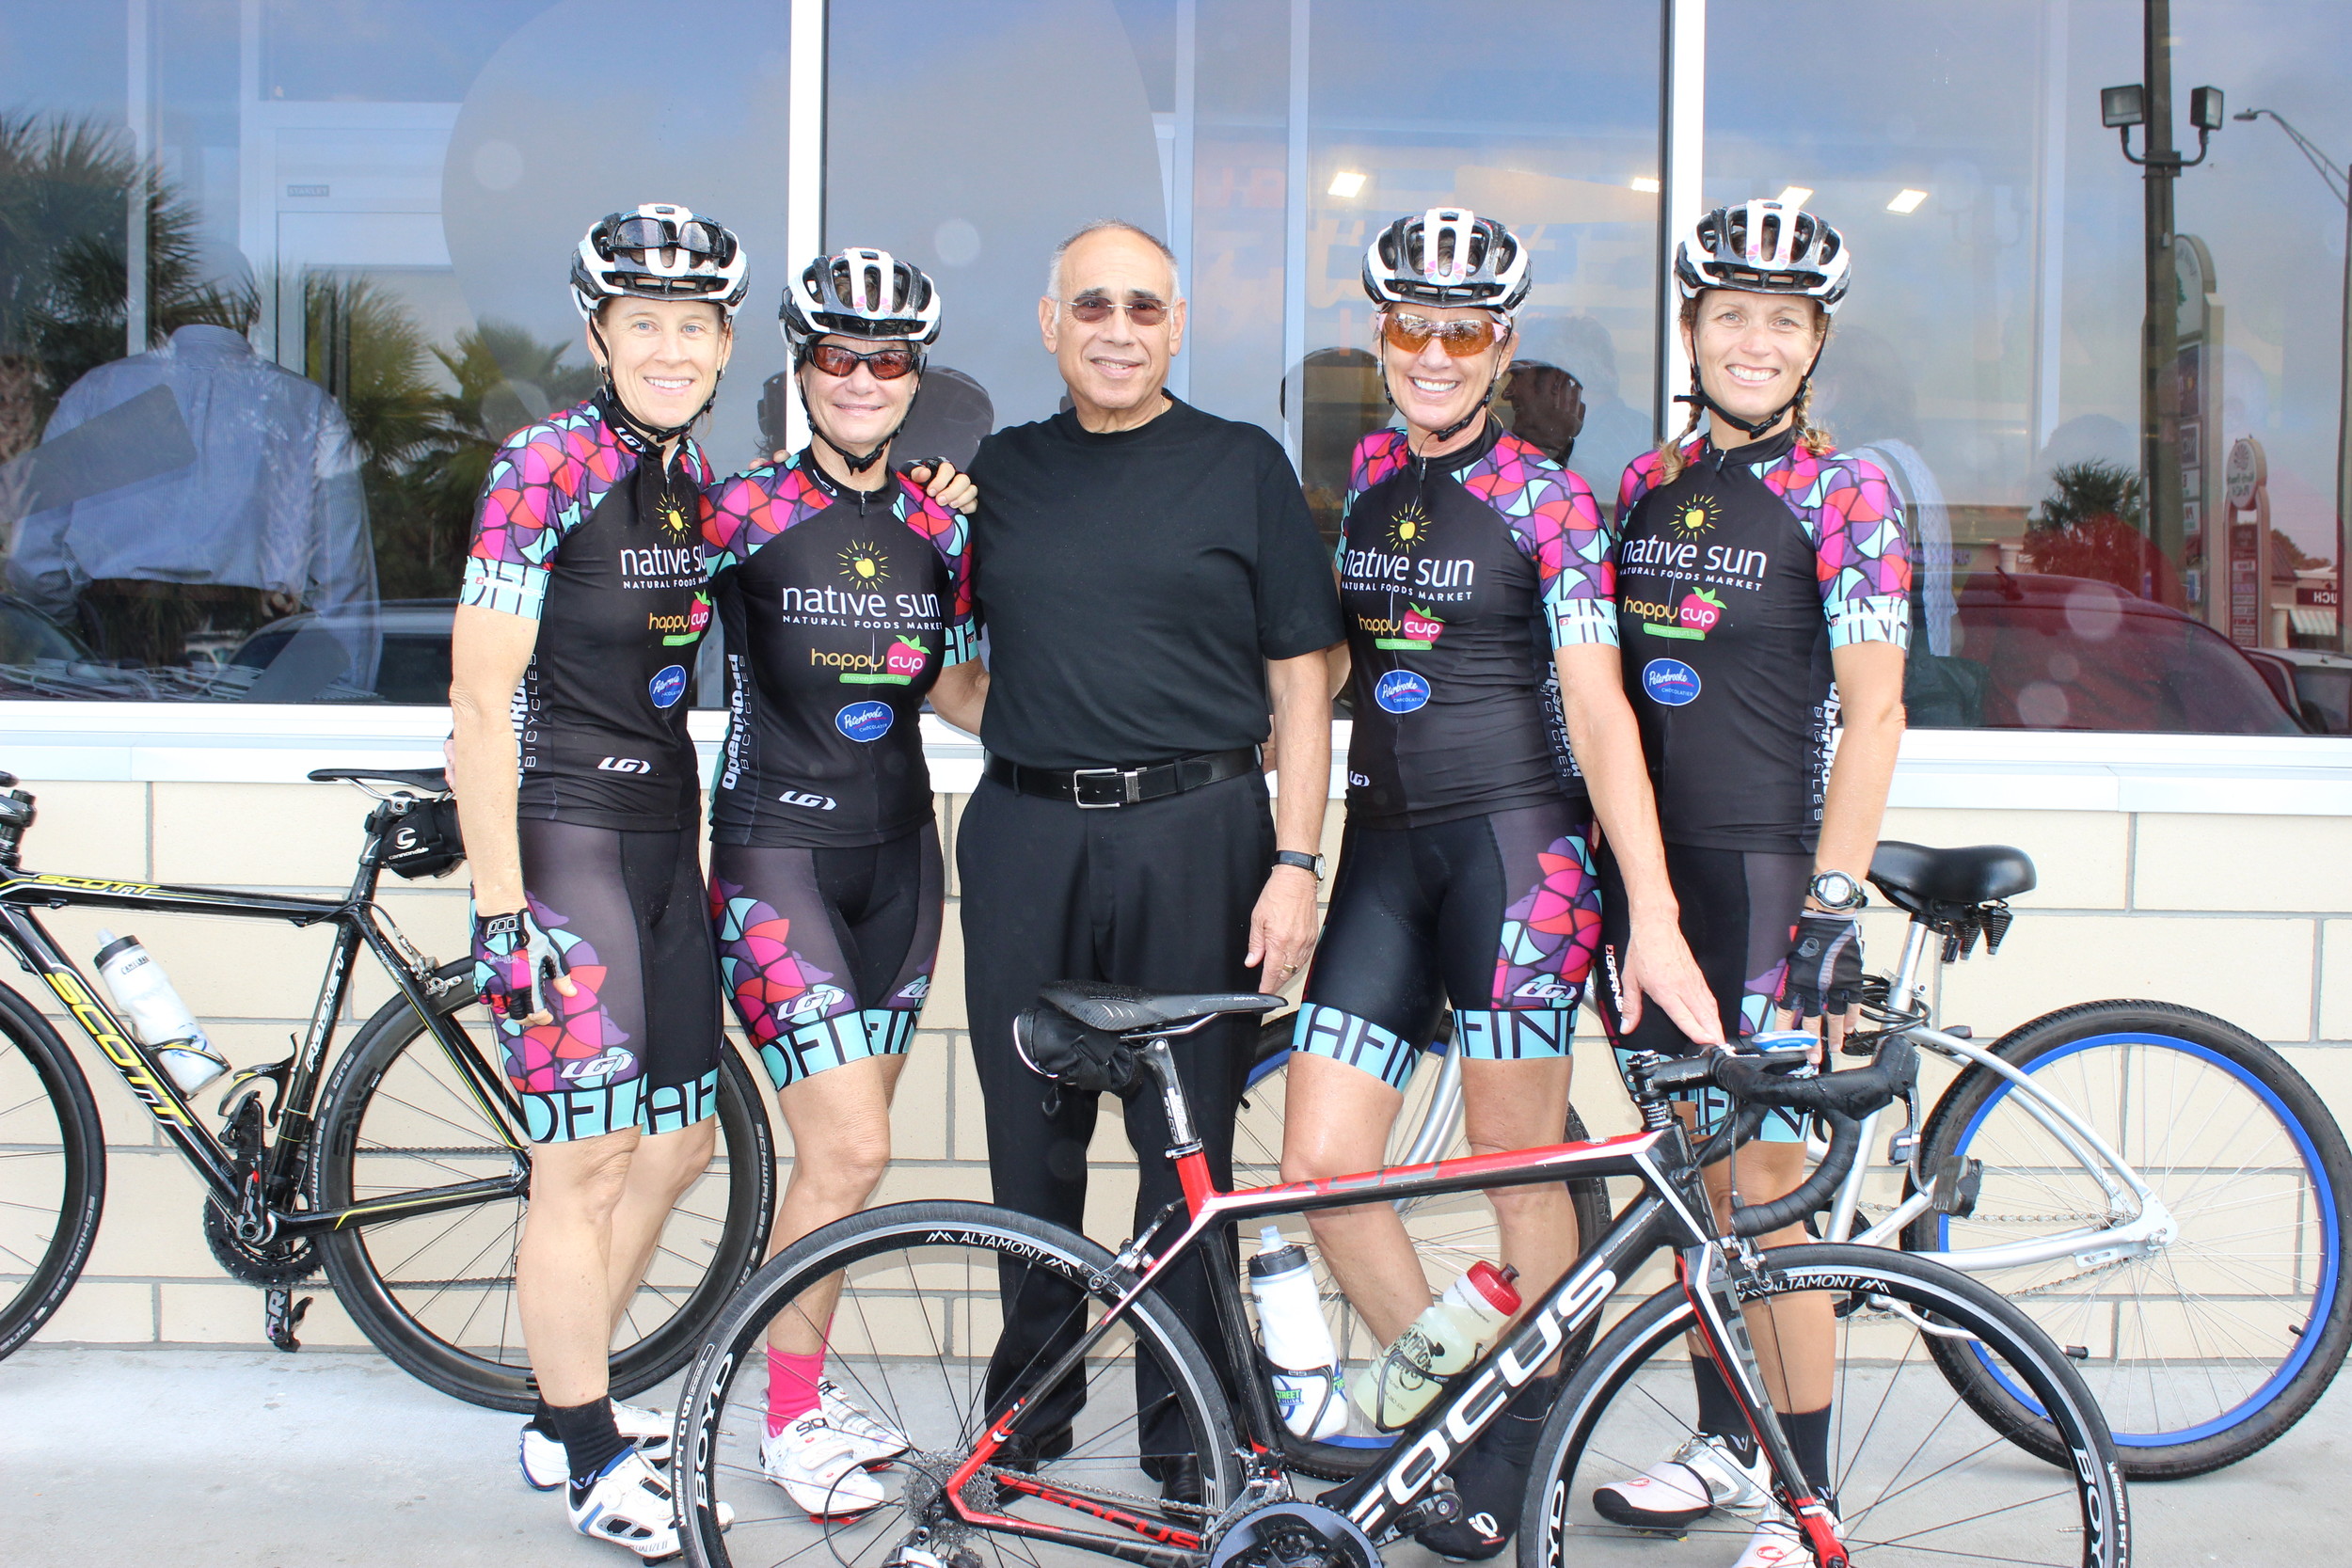 DelaFina Racing group with Mel Gottlieb, Native Sun founder Aaron Gottlieb’s father. The amateur women’s racing team is sponsored by Native Sun.